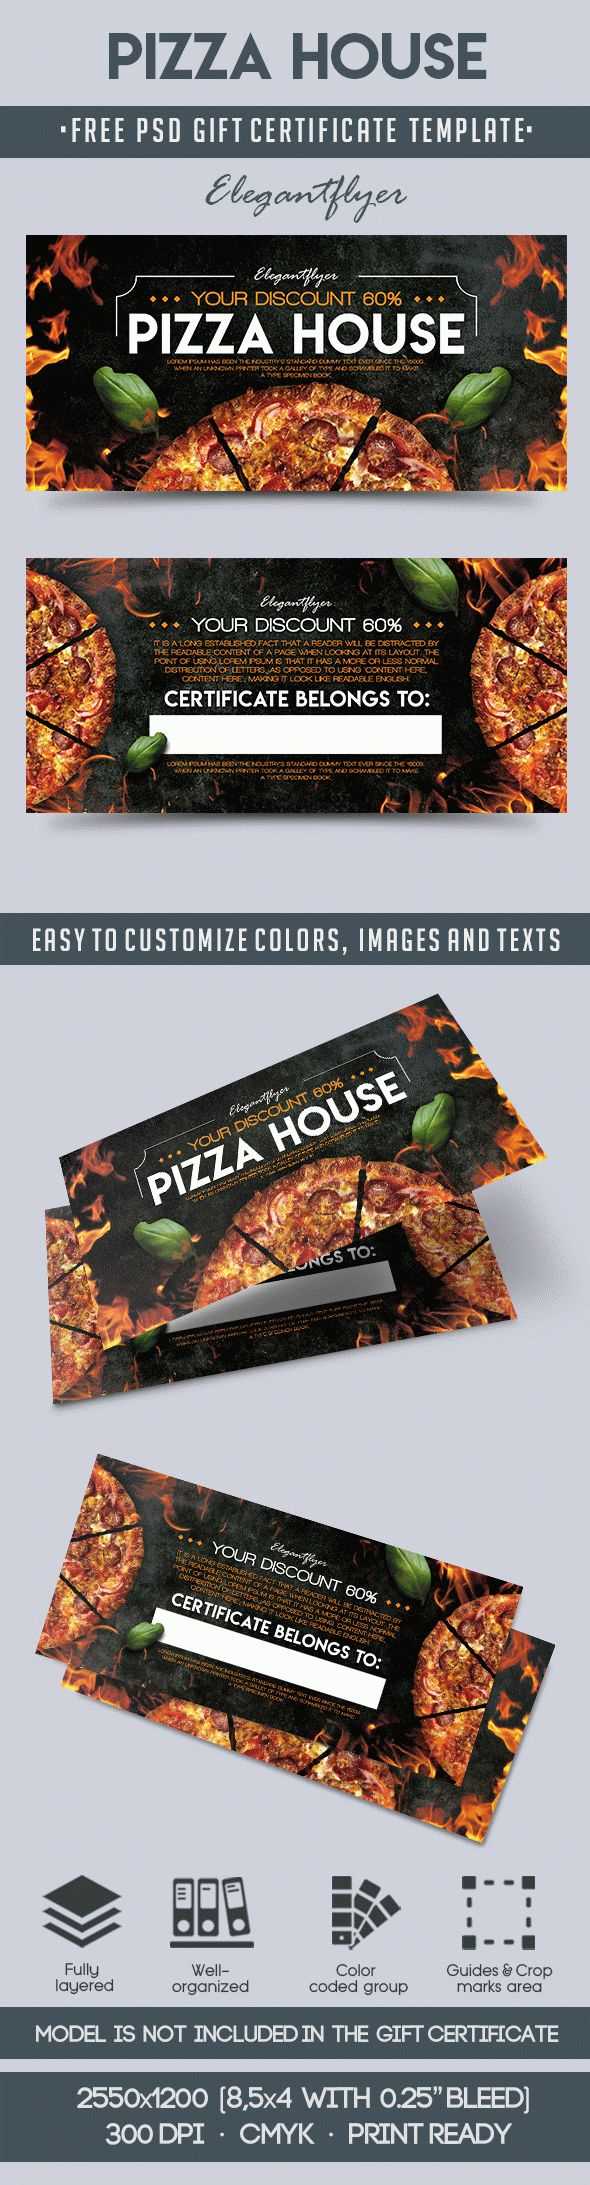 Pizza House – Free Gift Certificate Psd Template Regarding Pizza Gift Certificate Template